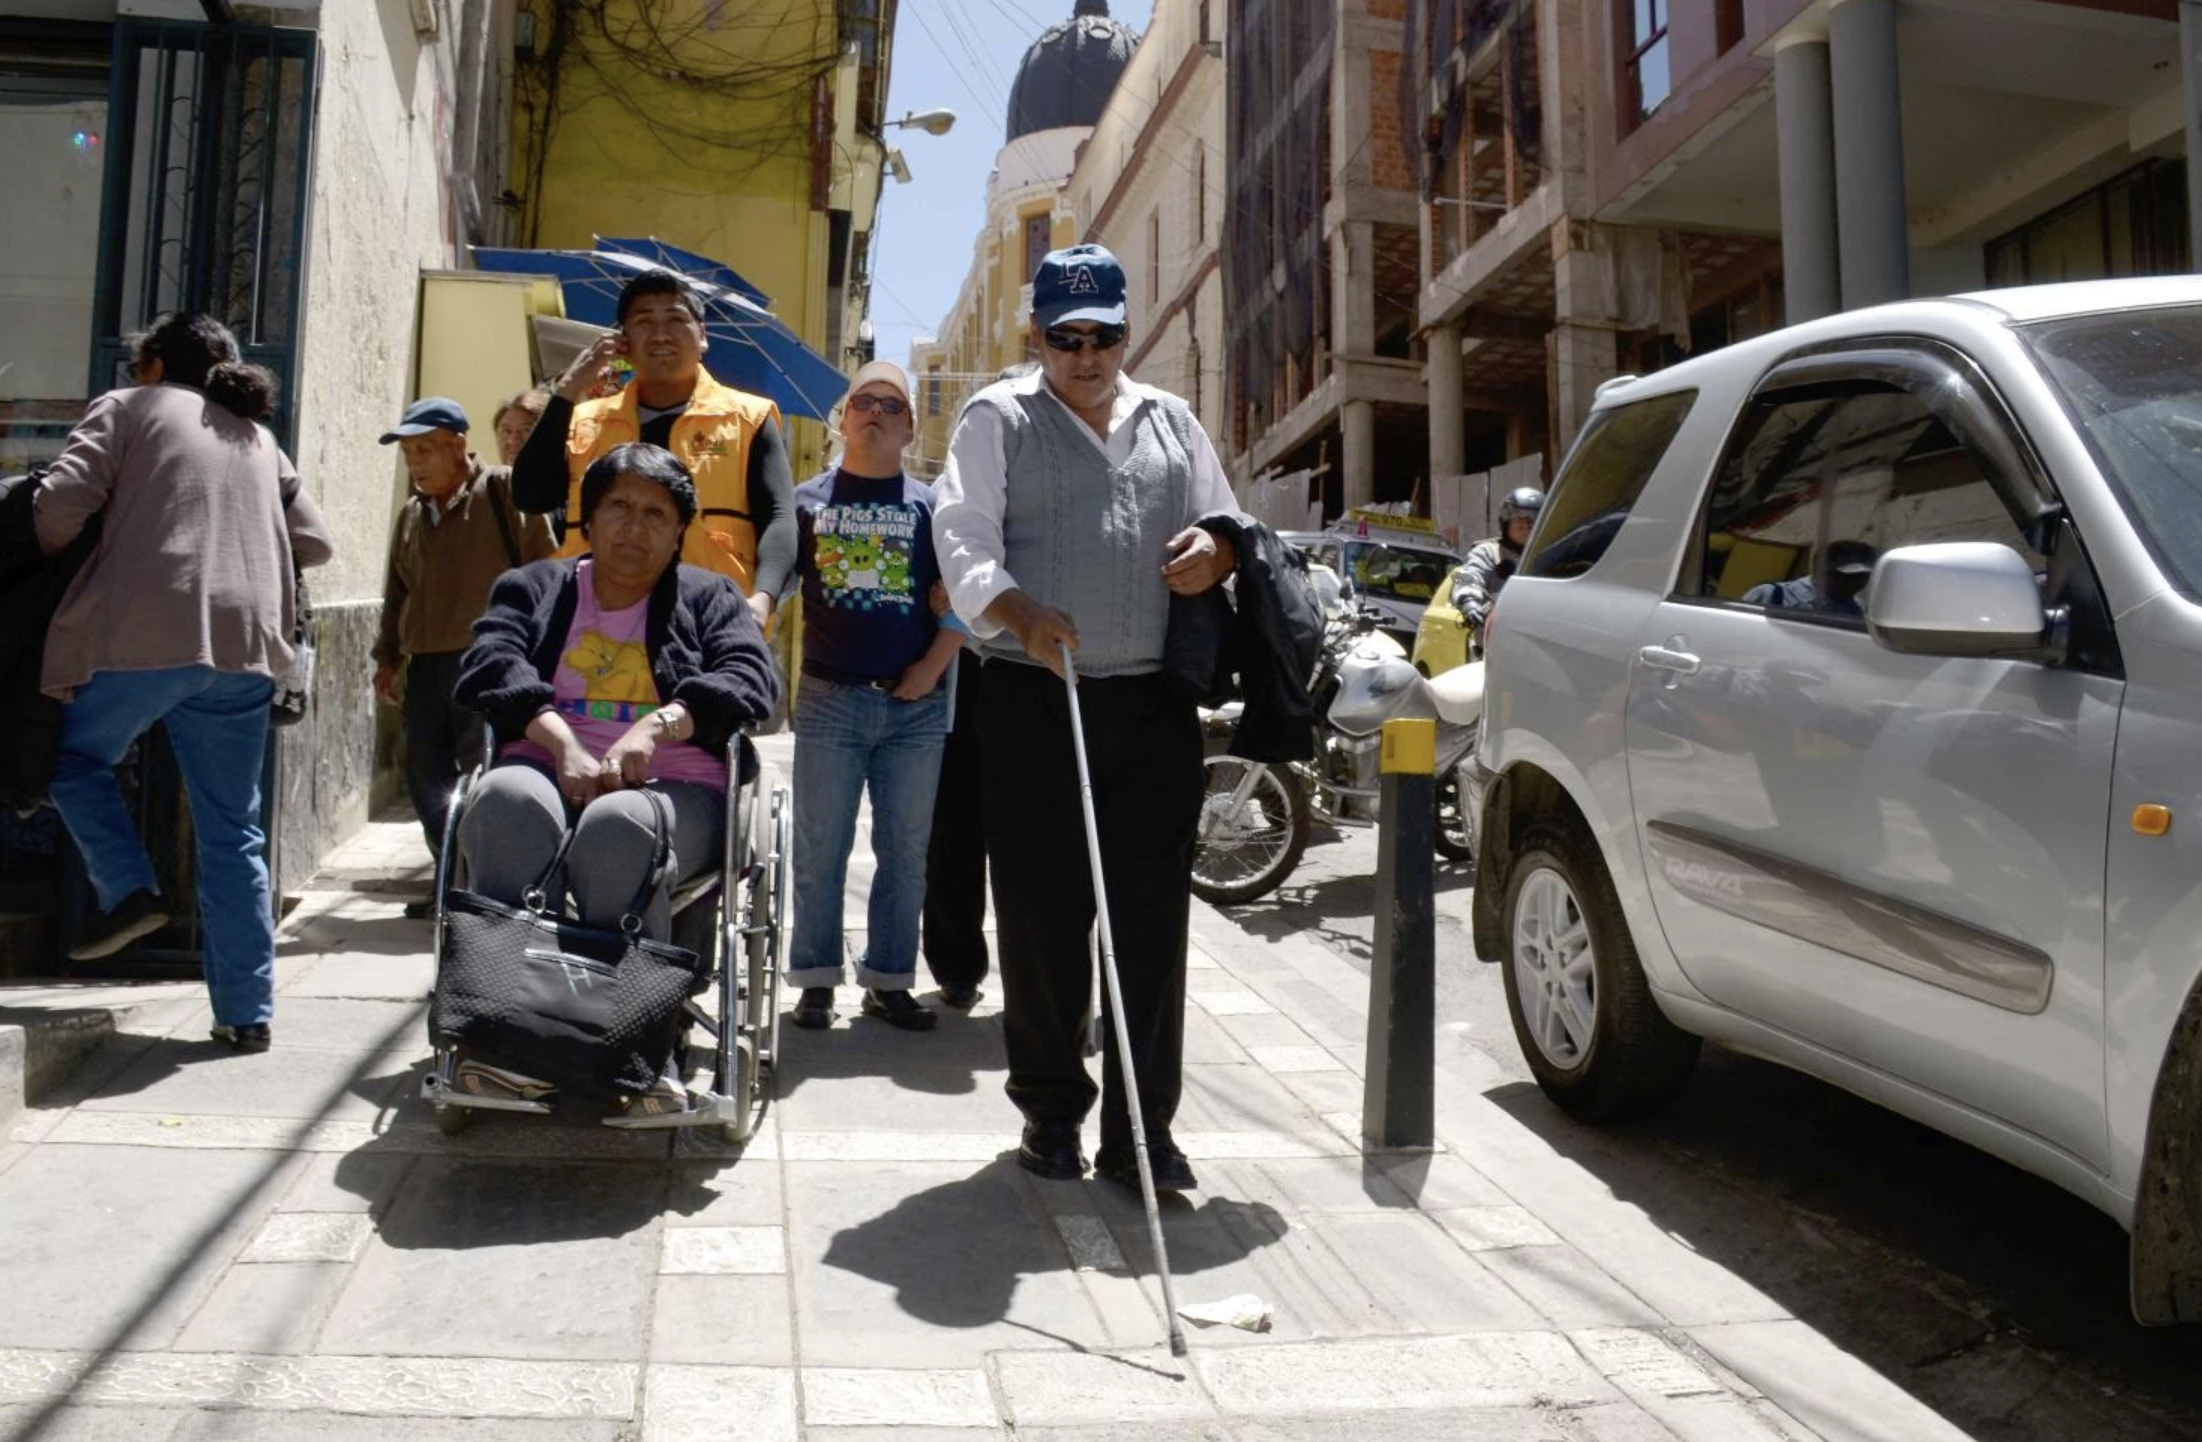 Various people move around city with different mobility aids including white canes and wheelchairs